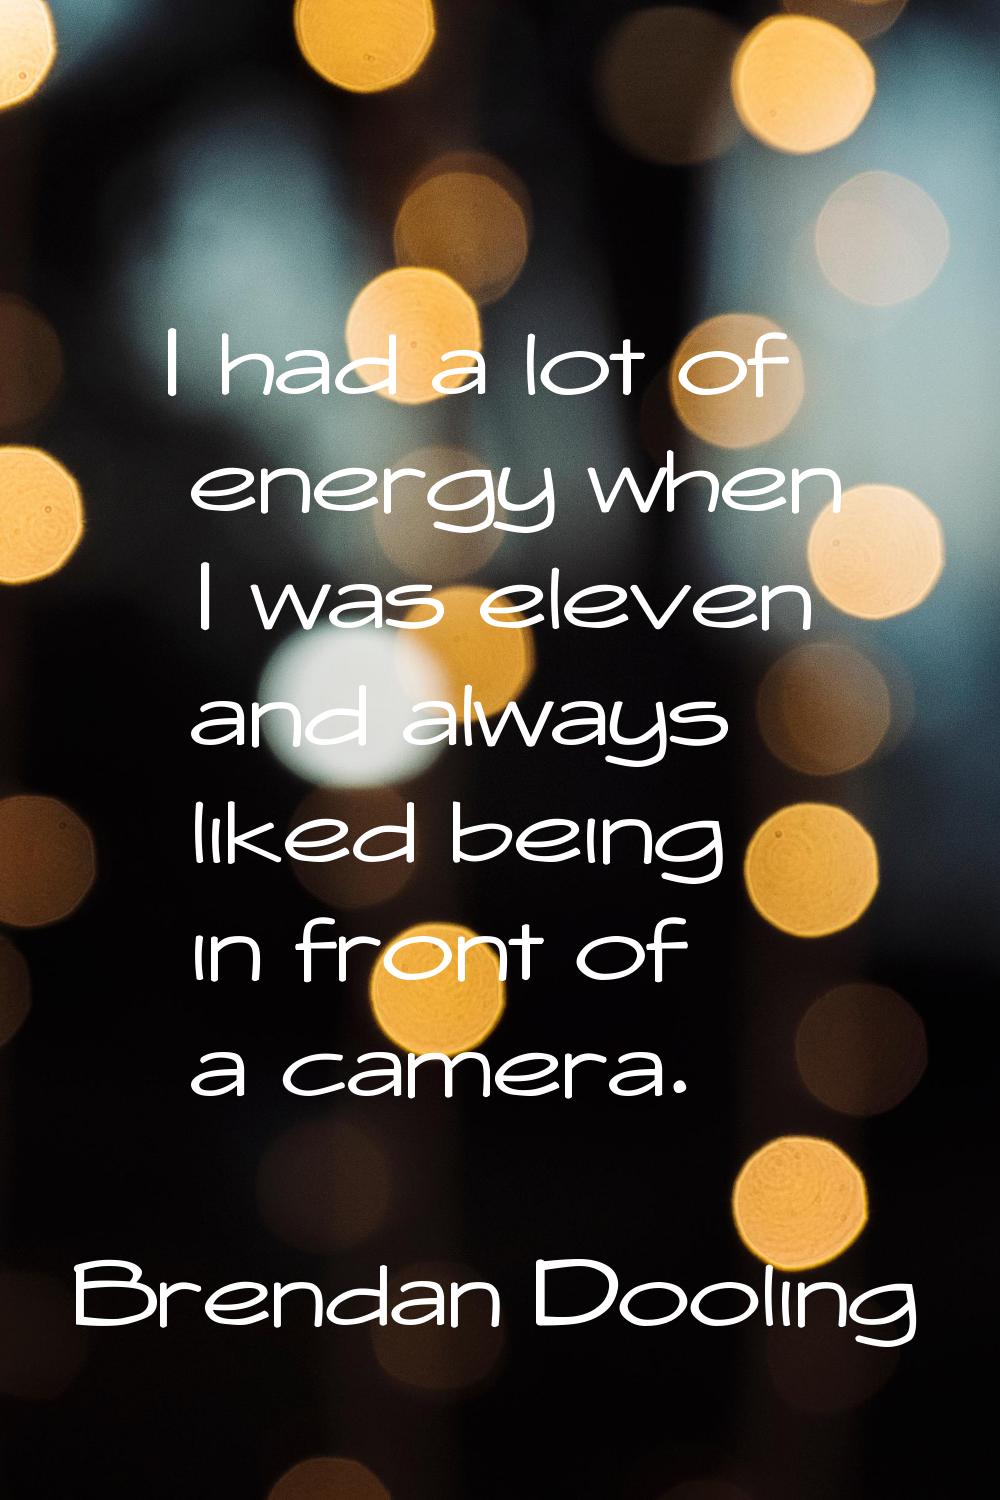 I had a lot of energy when I was eleven and always liked being in front of a camera.